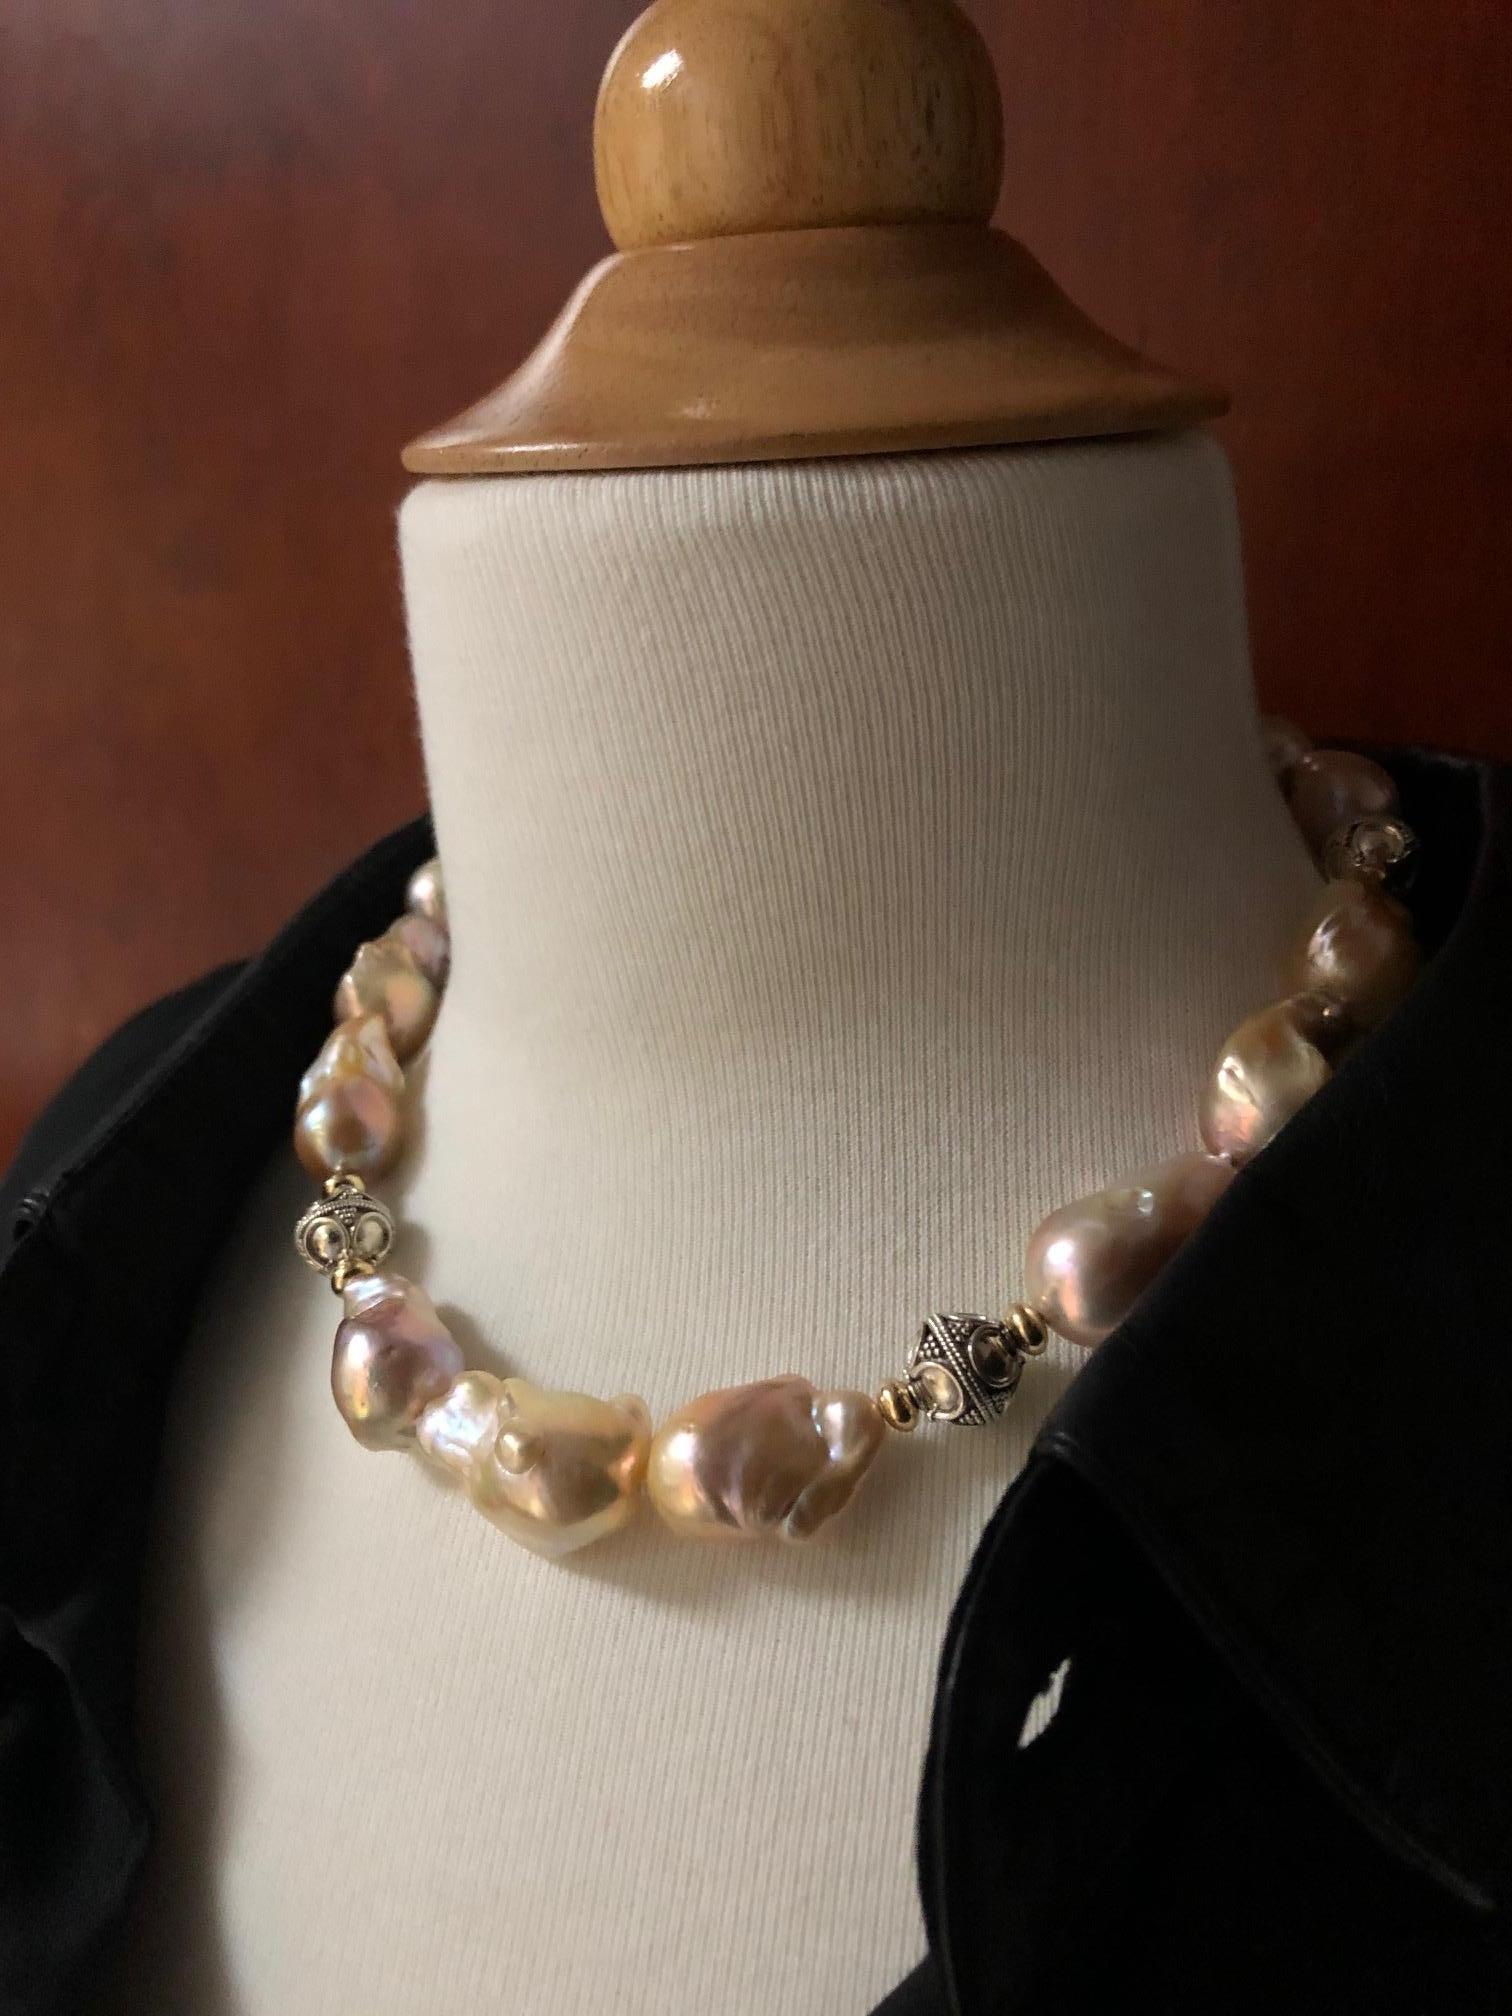 Women's Golden Peach Baroque Pearl Choker Necklace w/ Silver & 18k Yellow Gold Accents